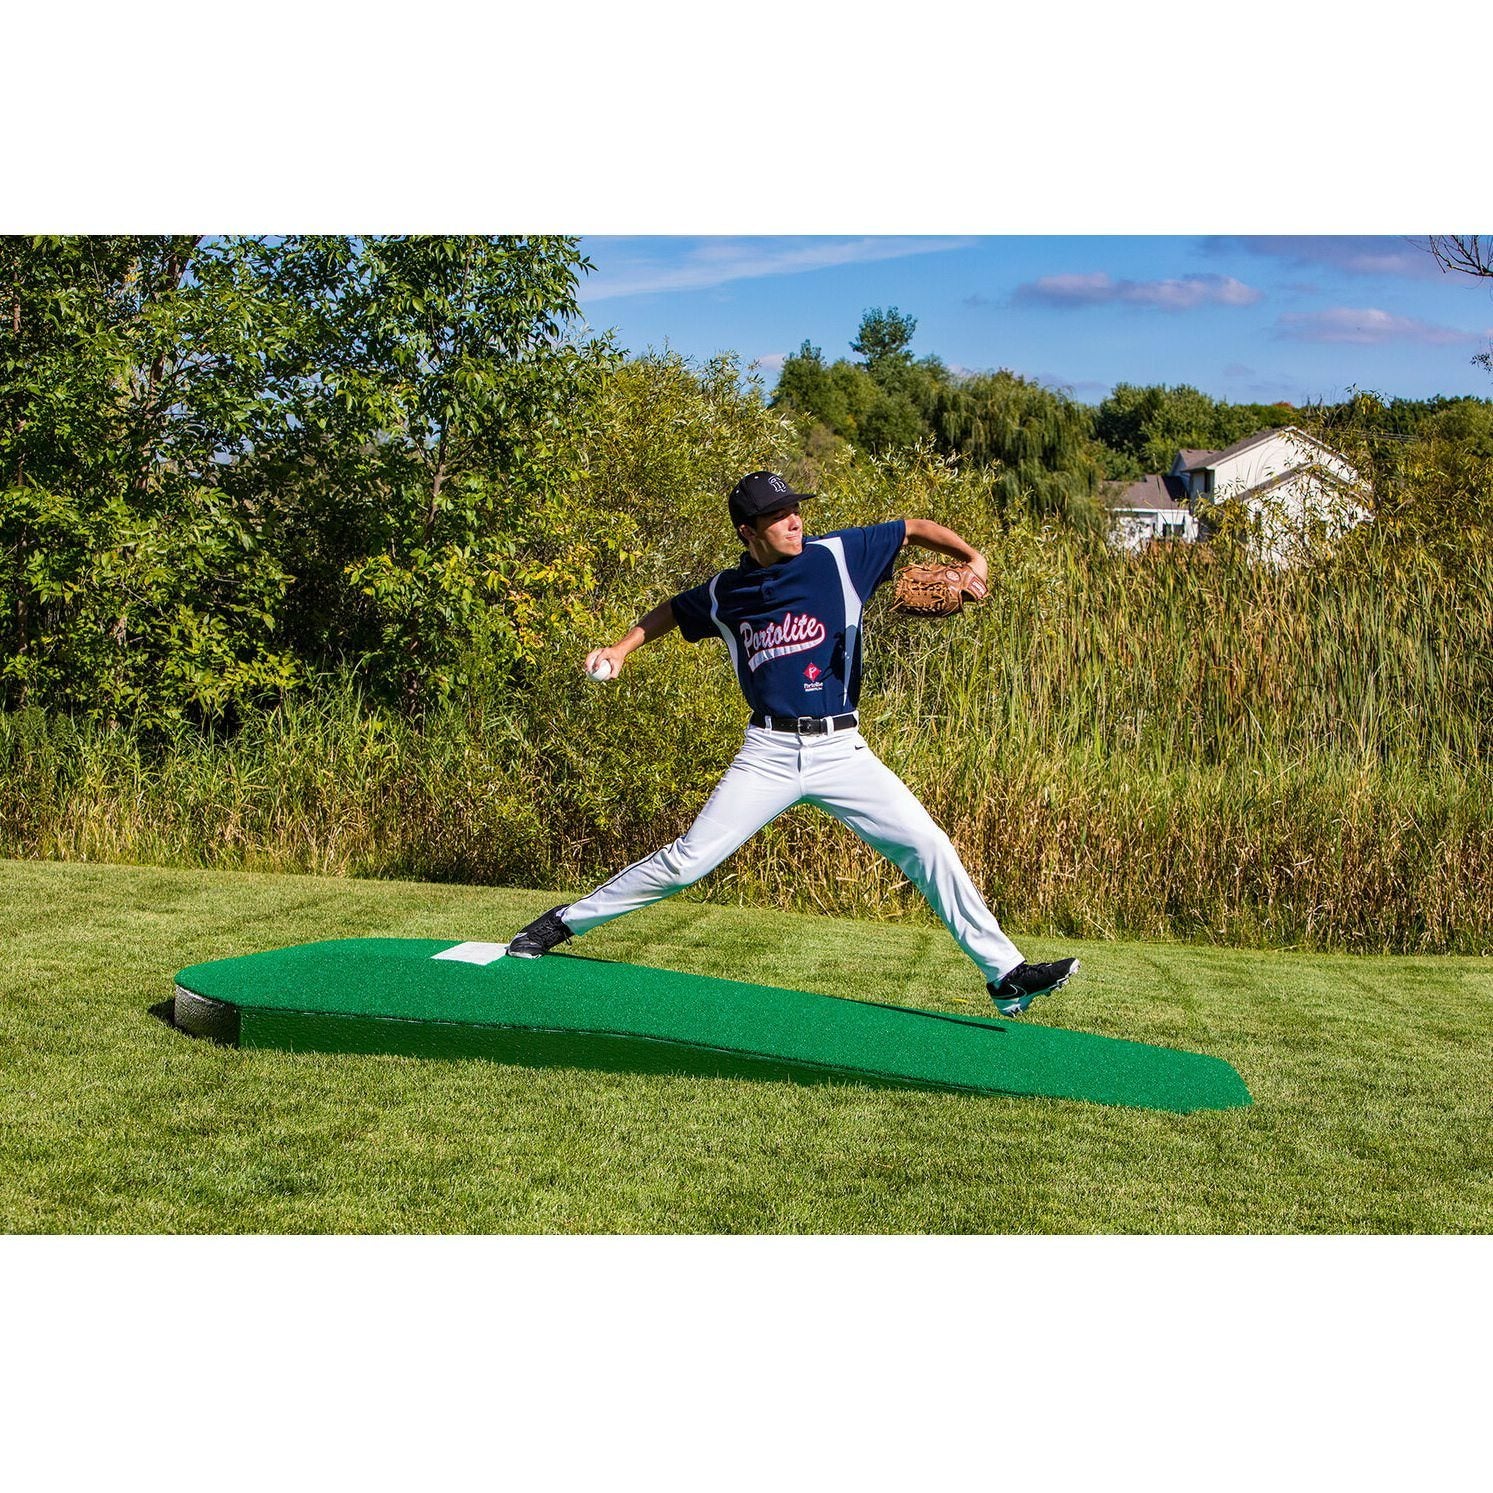 Portolite 10" Portable Practice Pitching Mound green side view pitcher on mound